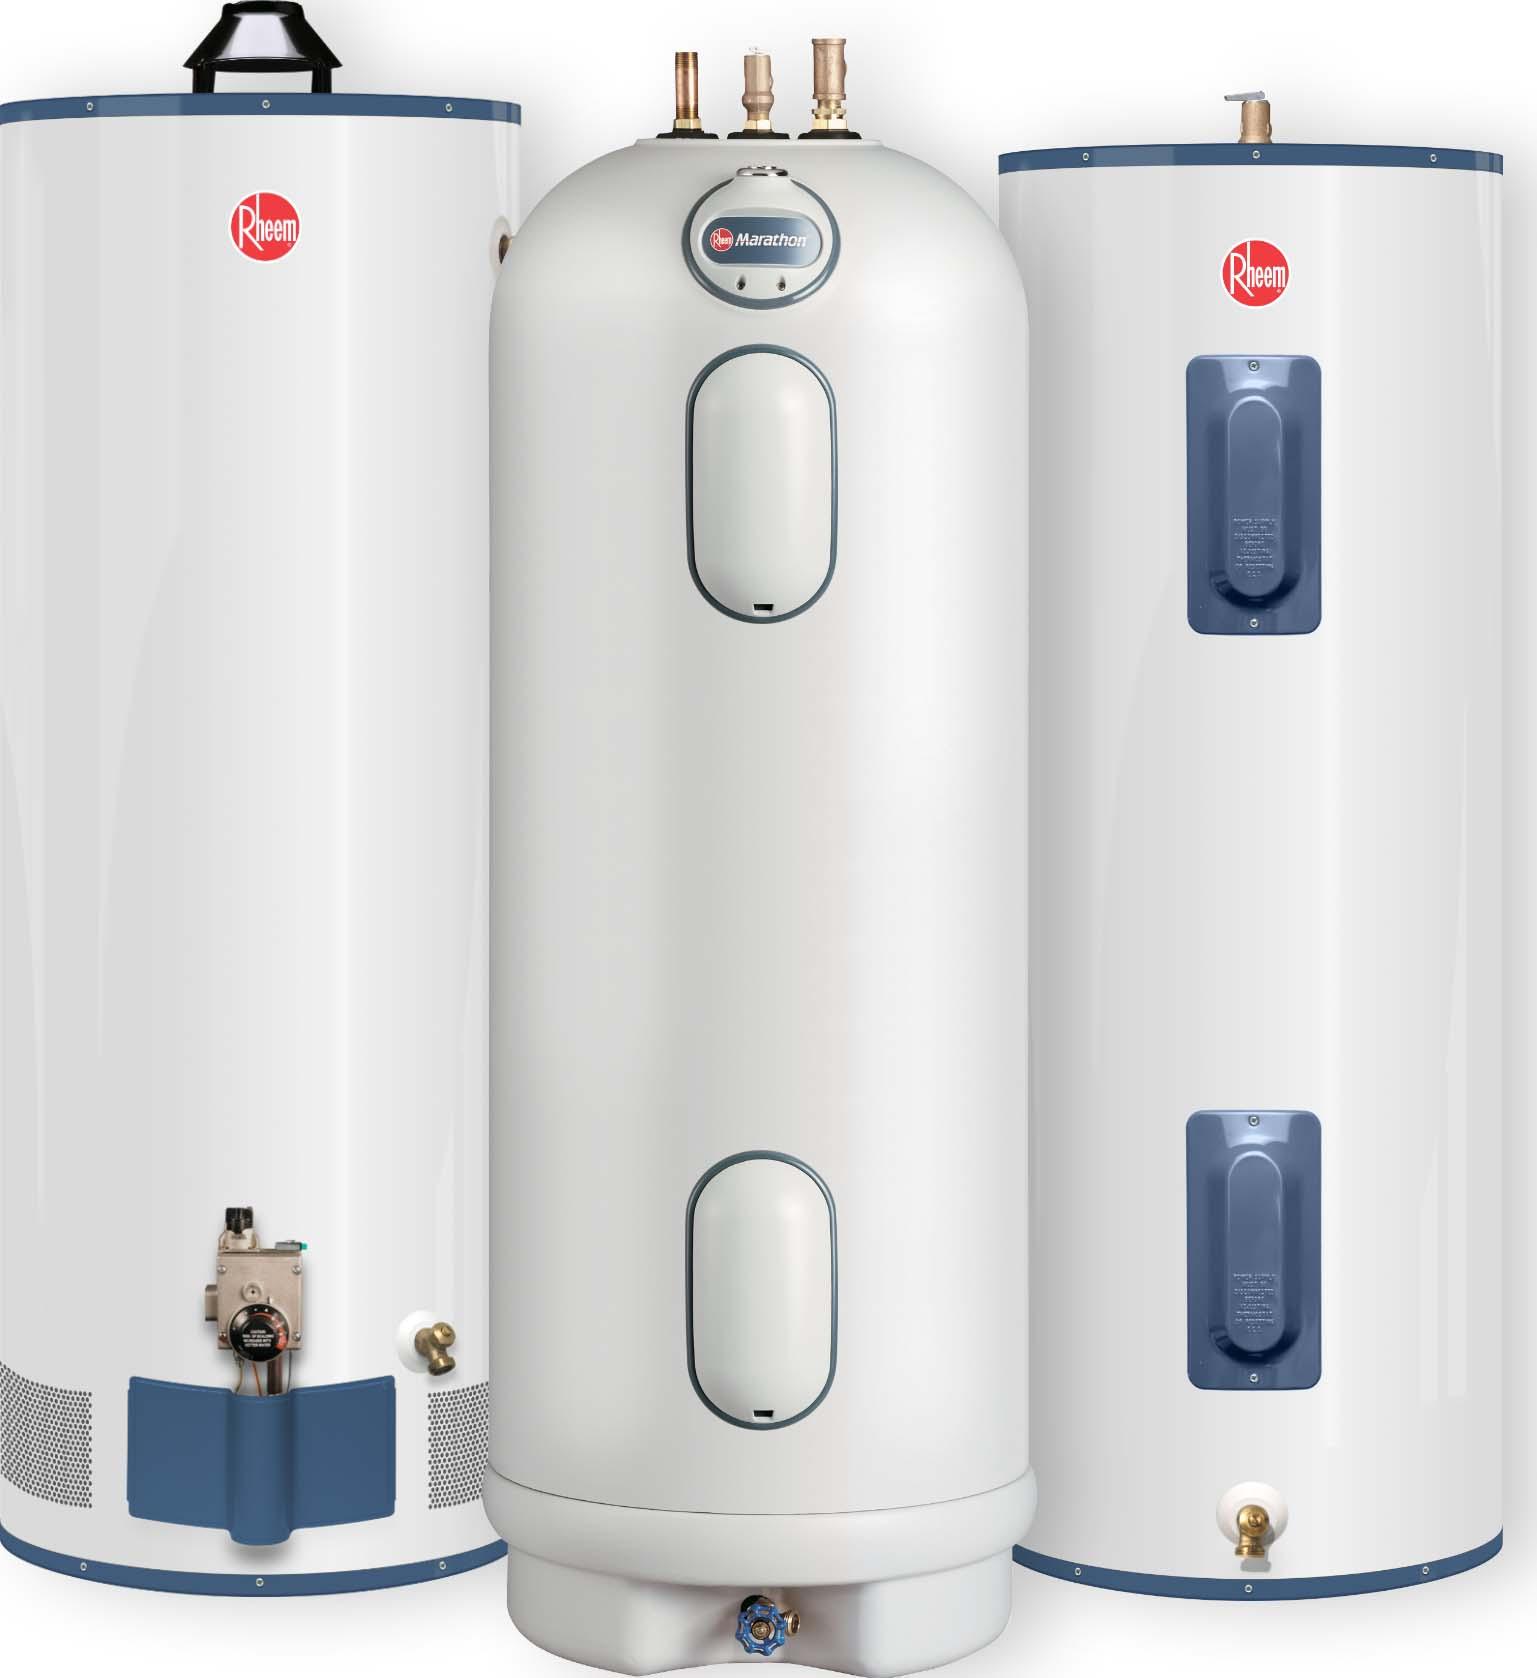 hot water heater issues resolved by Great American Plumbing